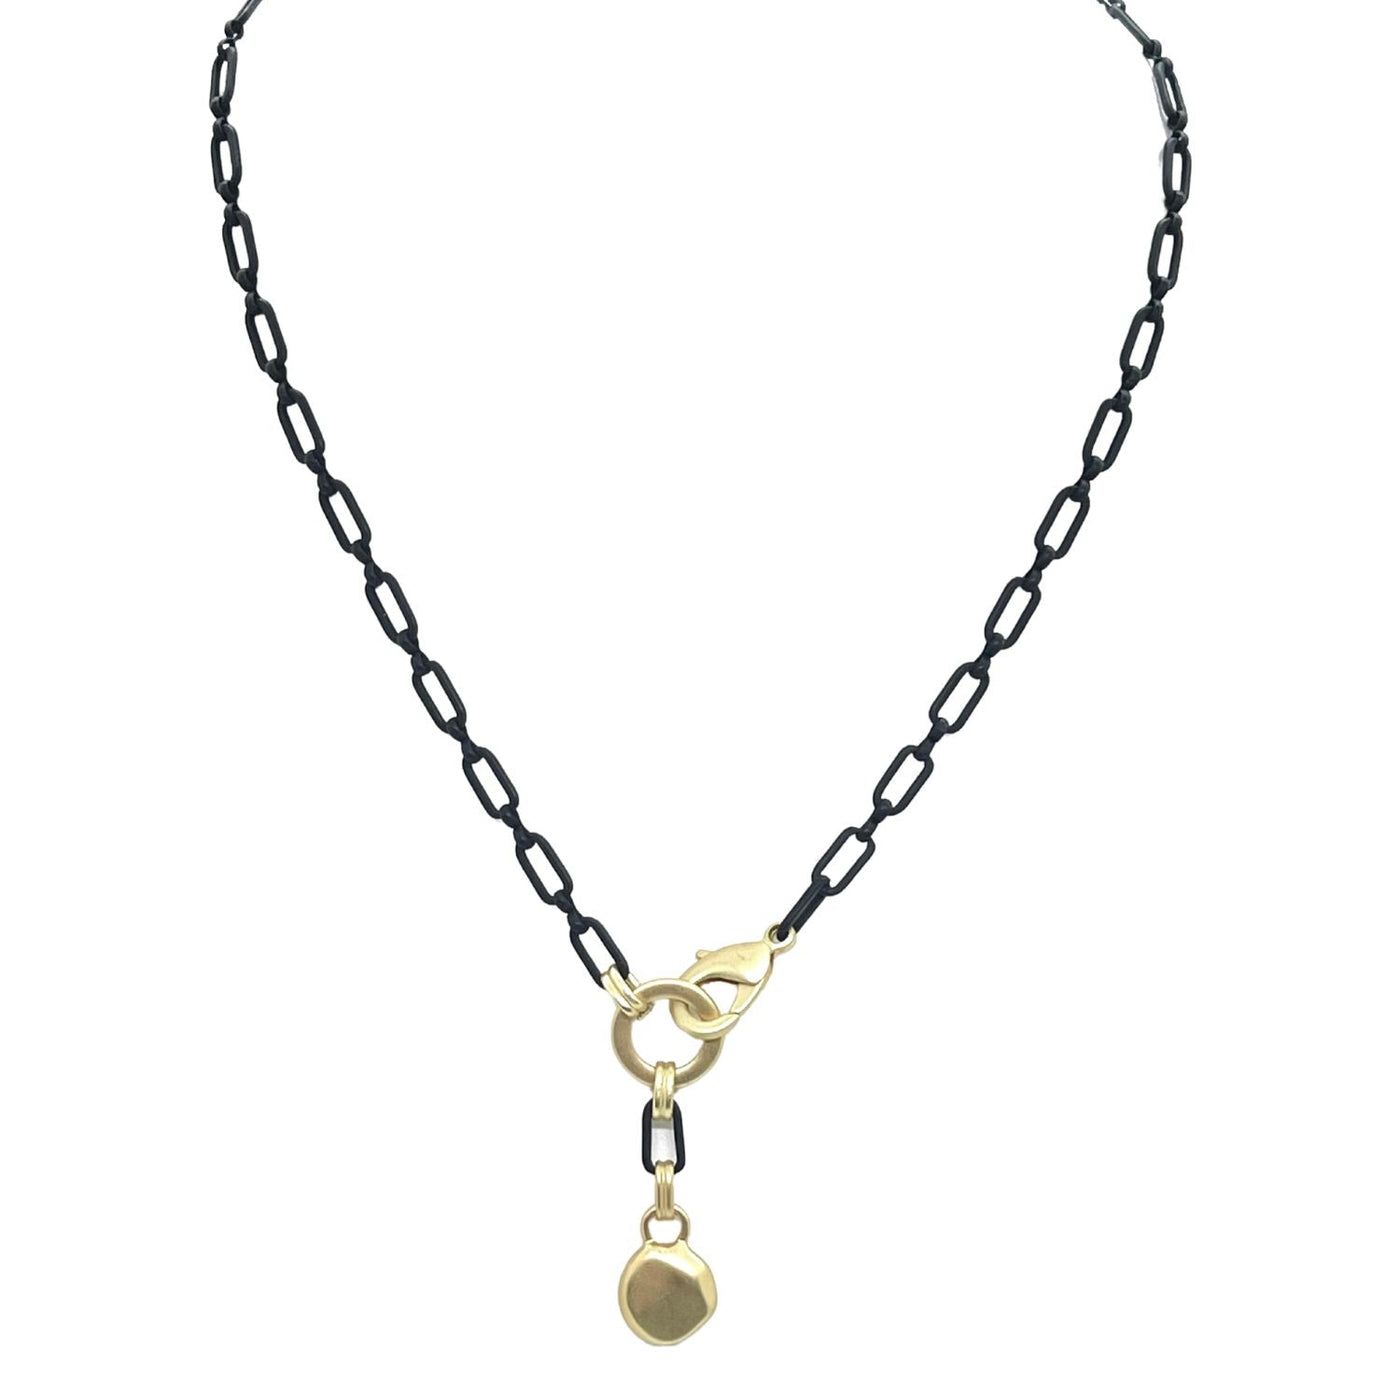 Matte Black Paperclip Chain Necklace With Gold Nugget Pendant